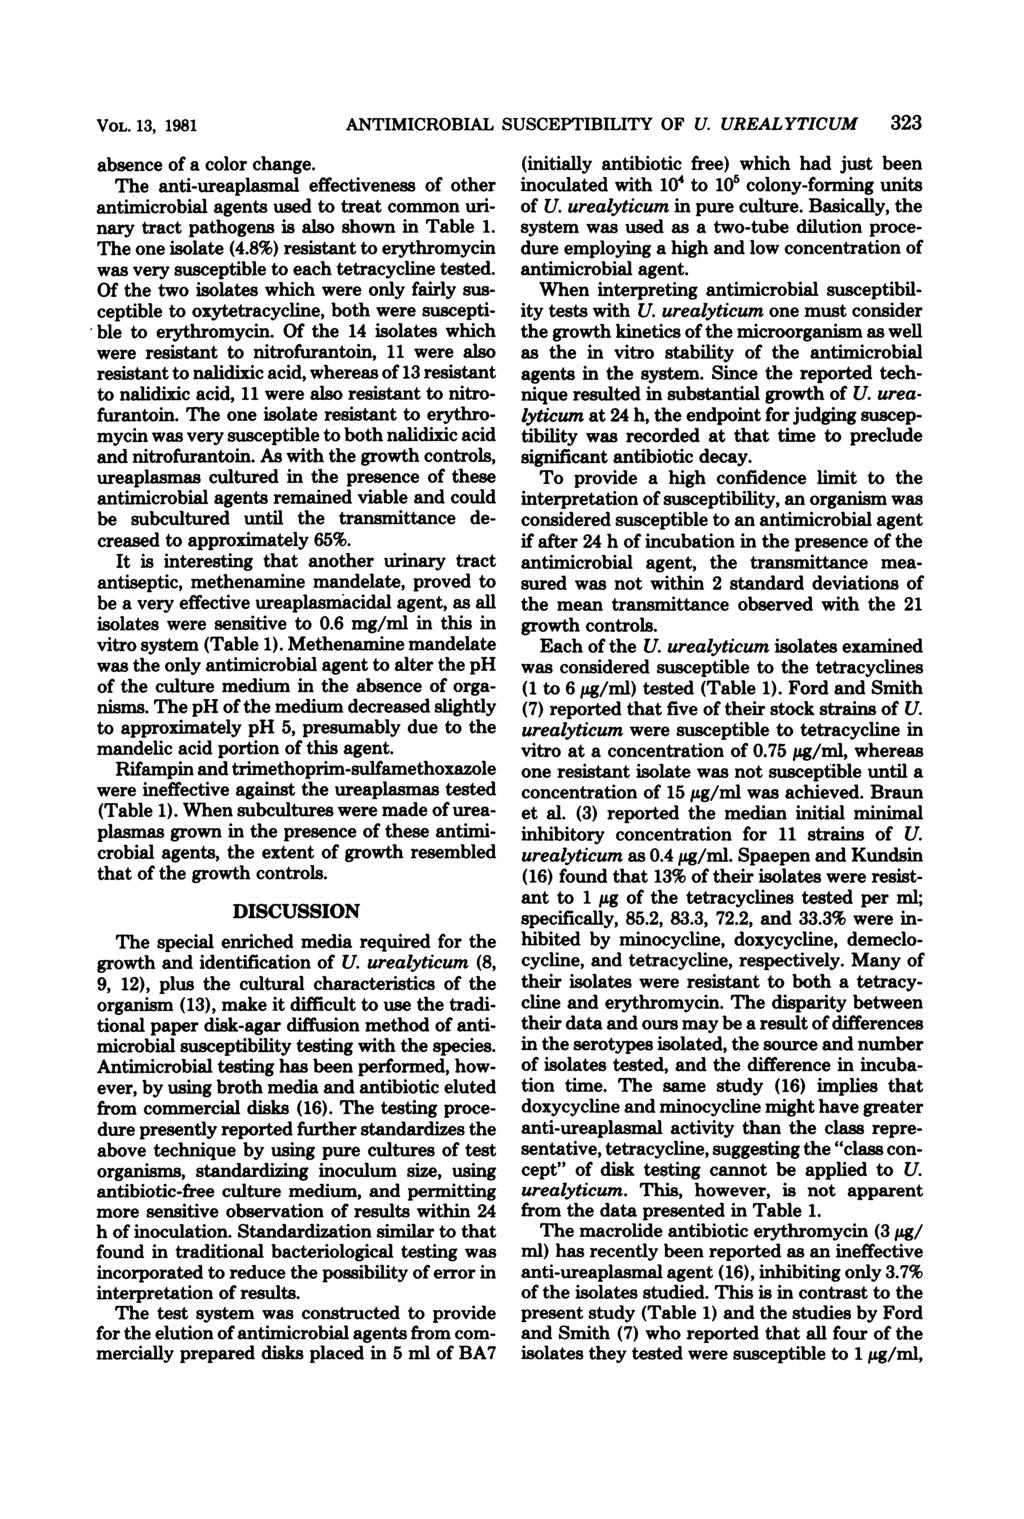 VOL. 13, 1981 absence of a color change. The anti-ureaplasmal effectiveness of other antimicrobial agents used to treat common urinary tract pathogens is also shown in Table 1. The one isolate (4.